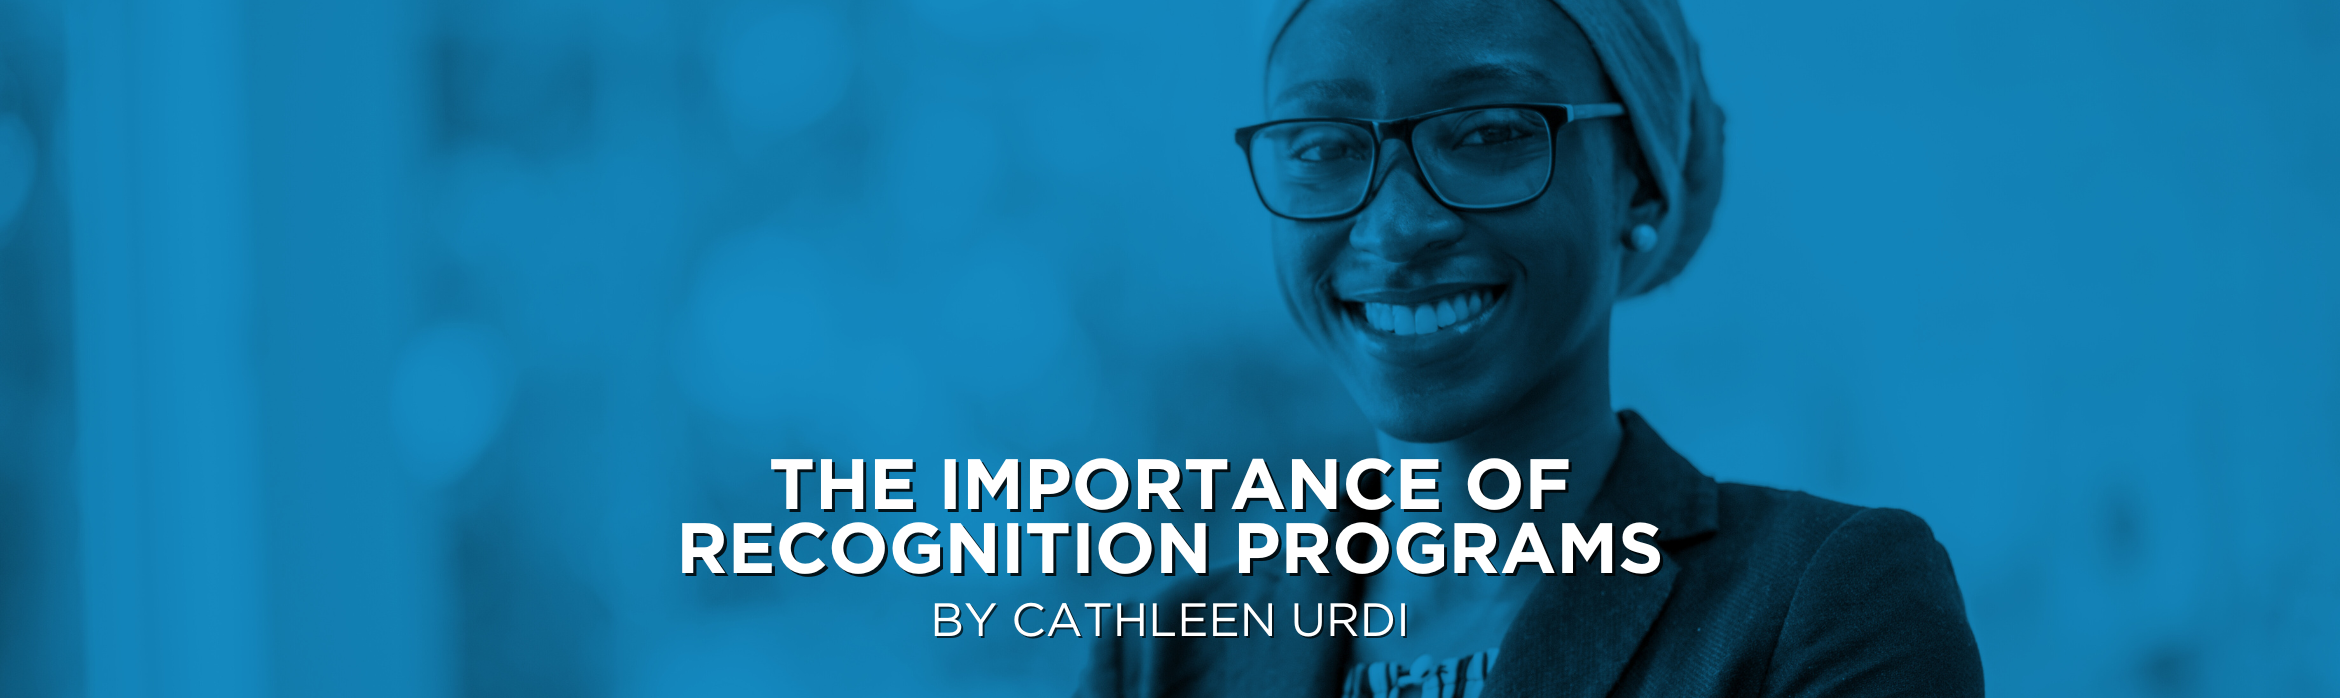 The Importance of Recognition Programs